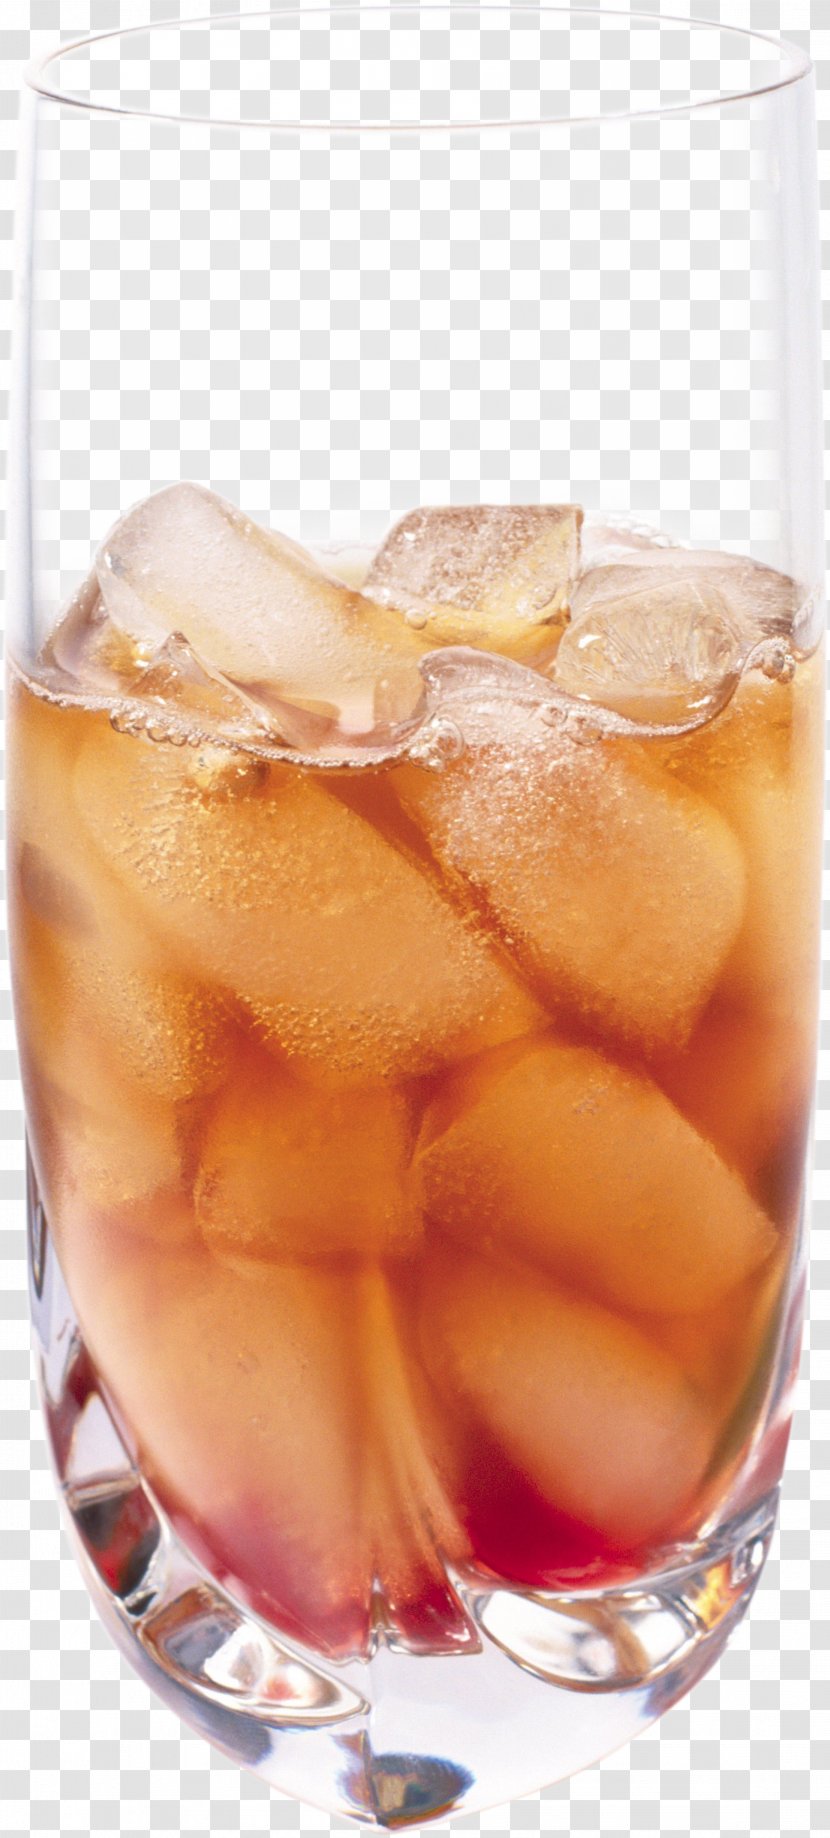 Old Fashioned Fizzy Drinks Cocktail Long Island Iced Tea Black Russian Transparent PNG